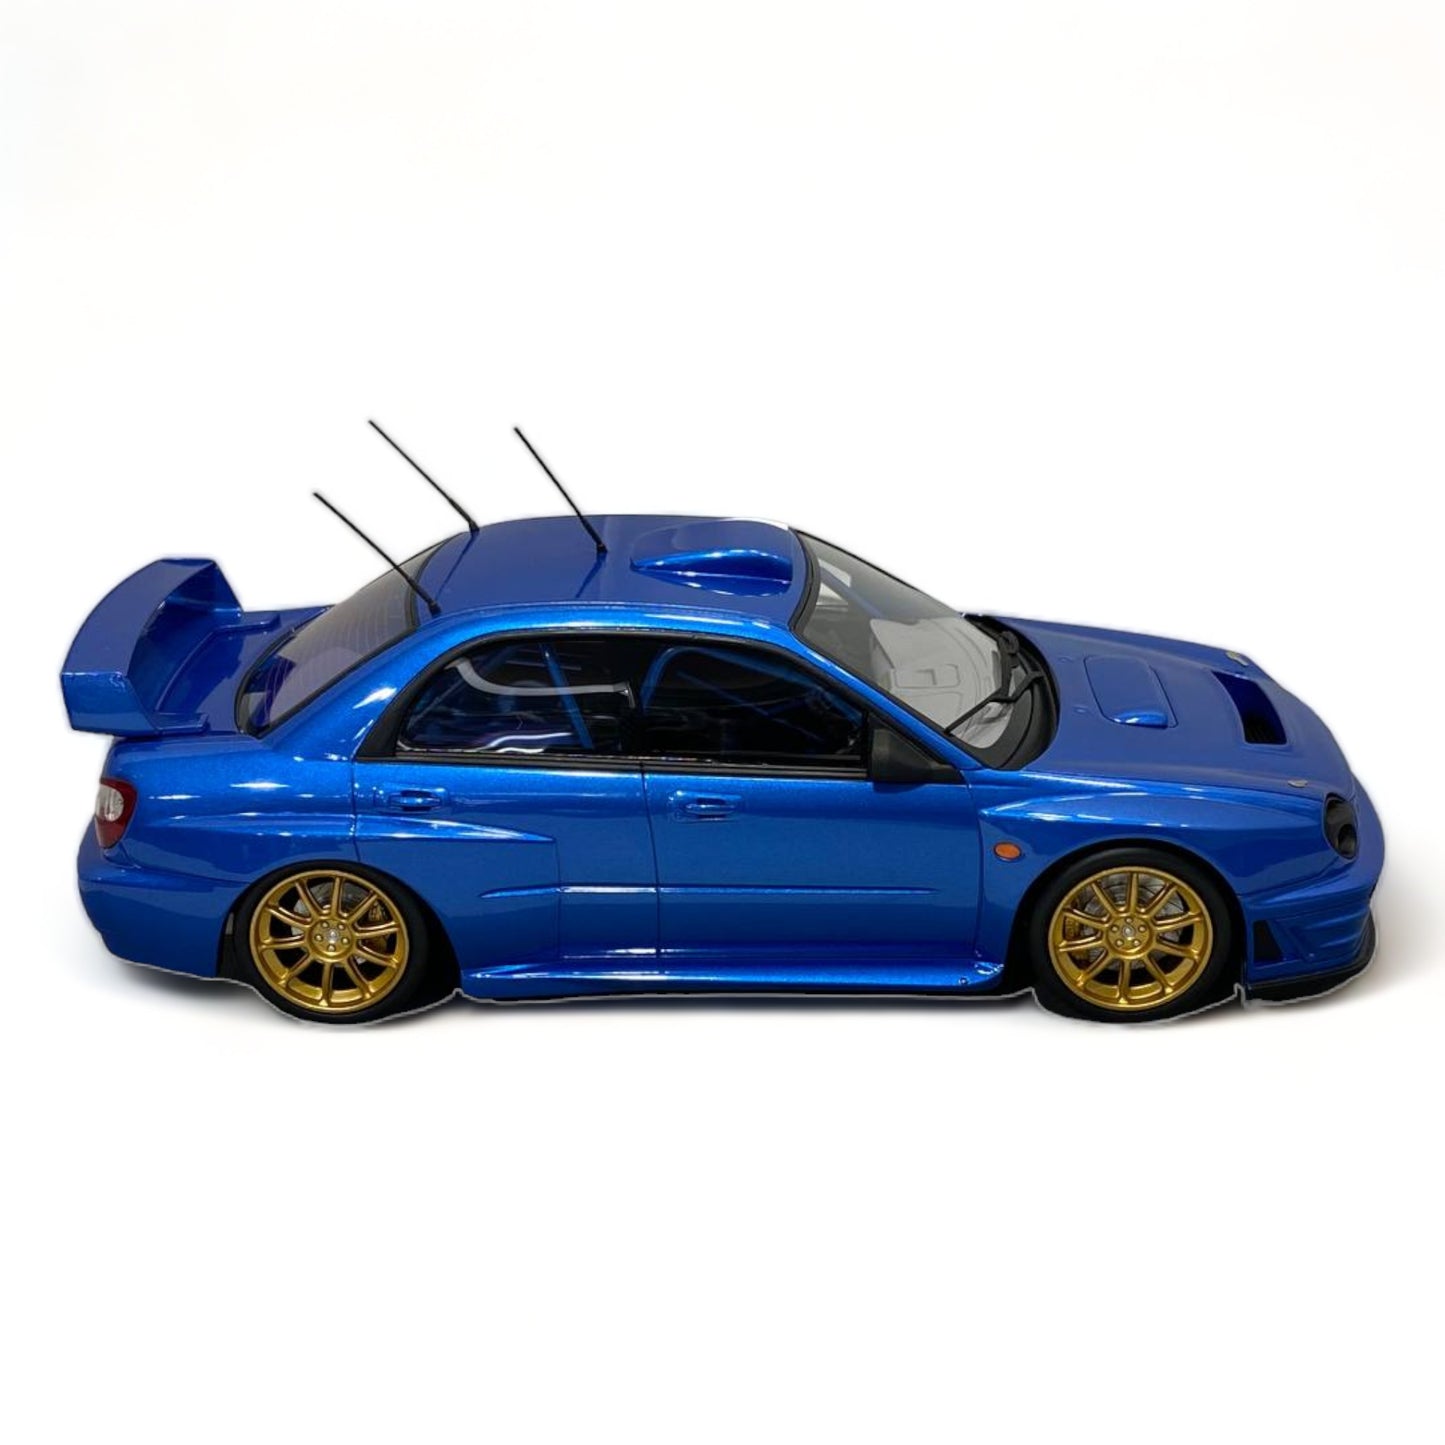 1/18 Diecast TOP MARQUES Subaru S7 Ready To Race Blue 2002